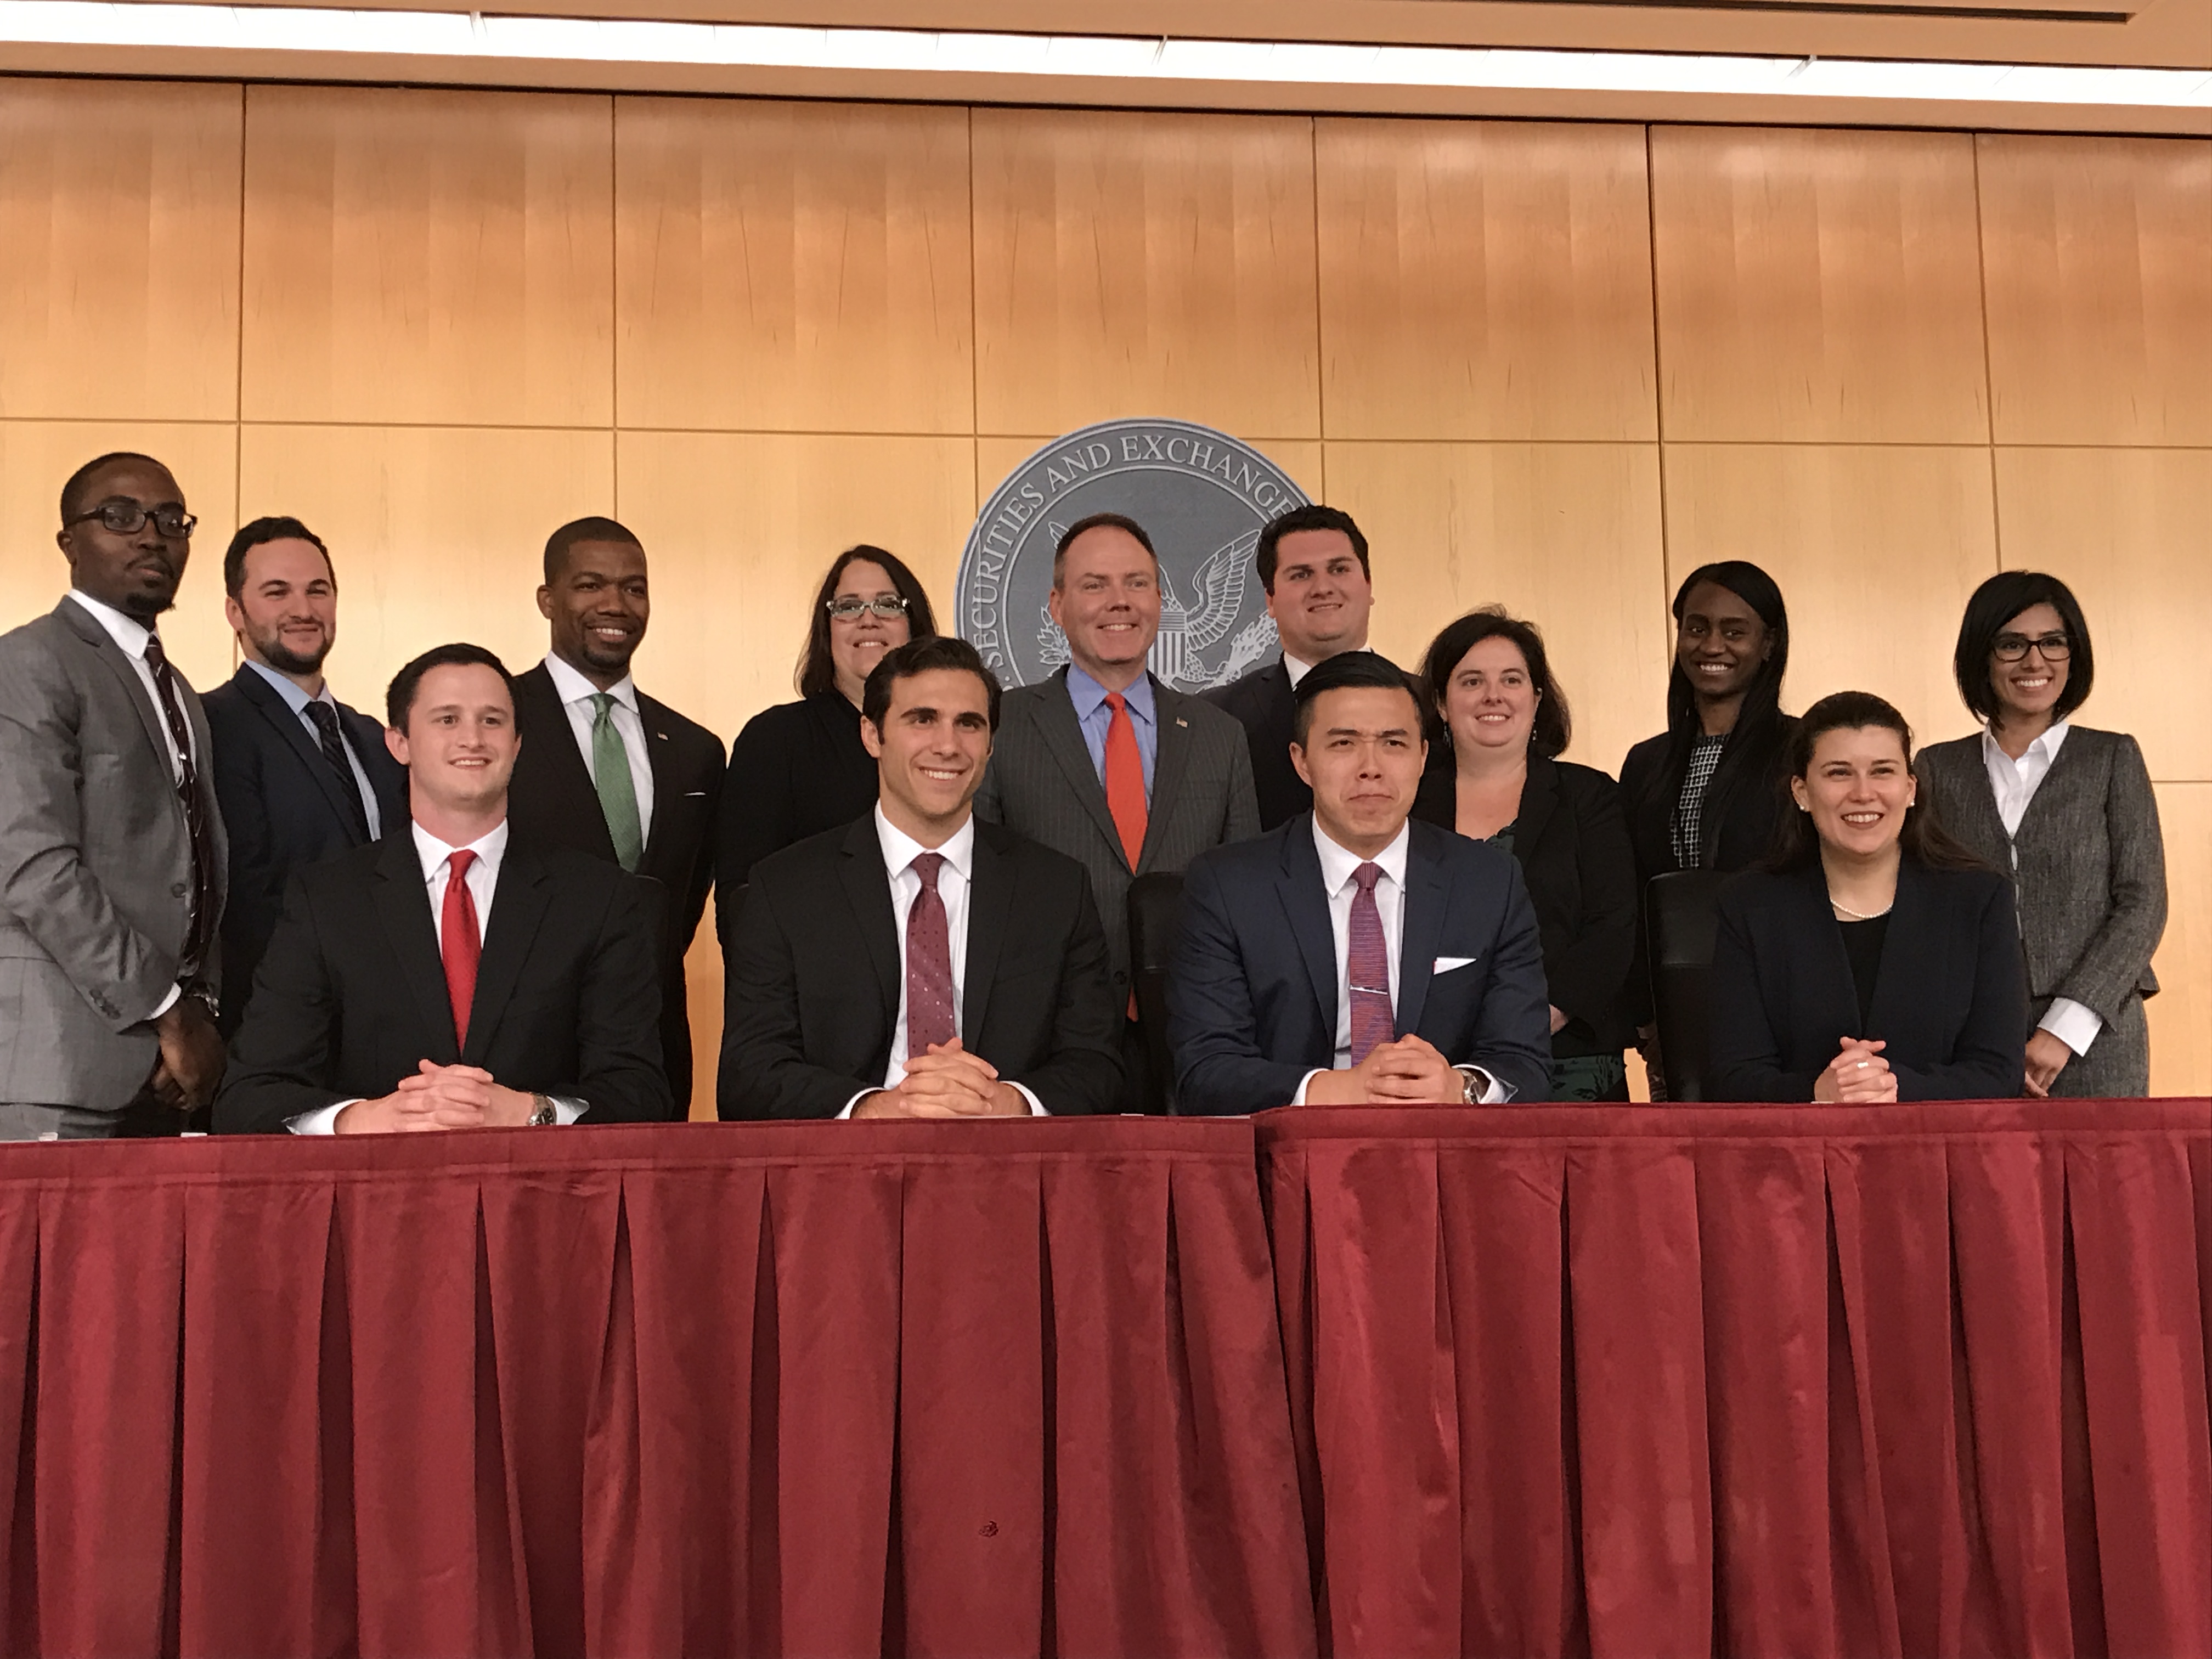 George State University College of Law Investor Advocacy Clinic's students pose with faculty and SEC staff at SEC's Atlanta Regional Office Investor Town Hall